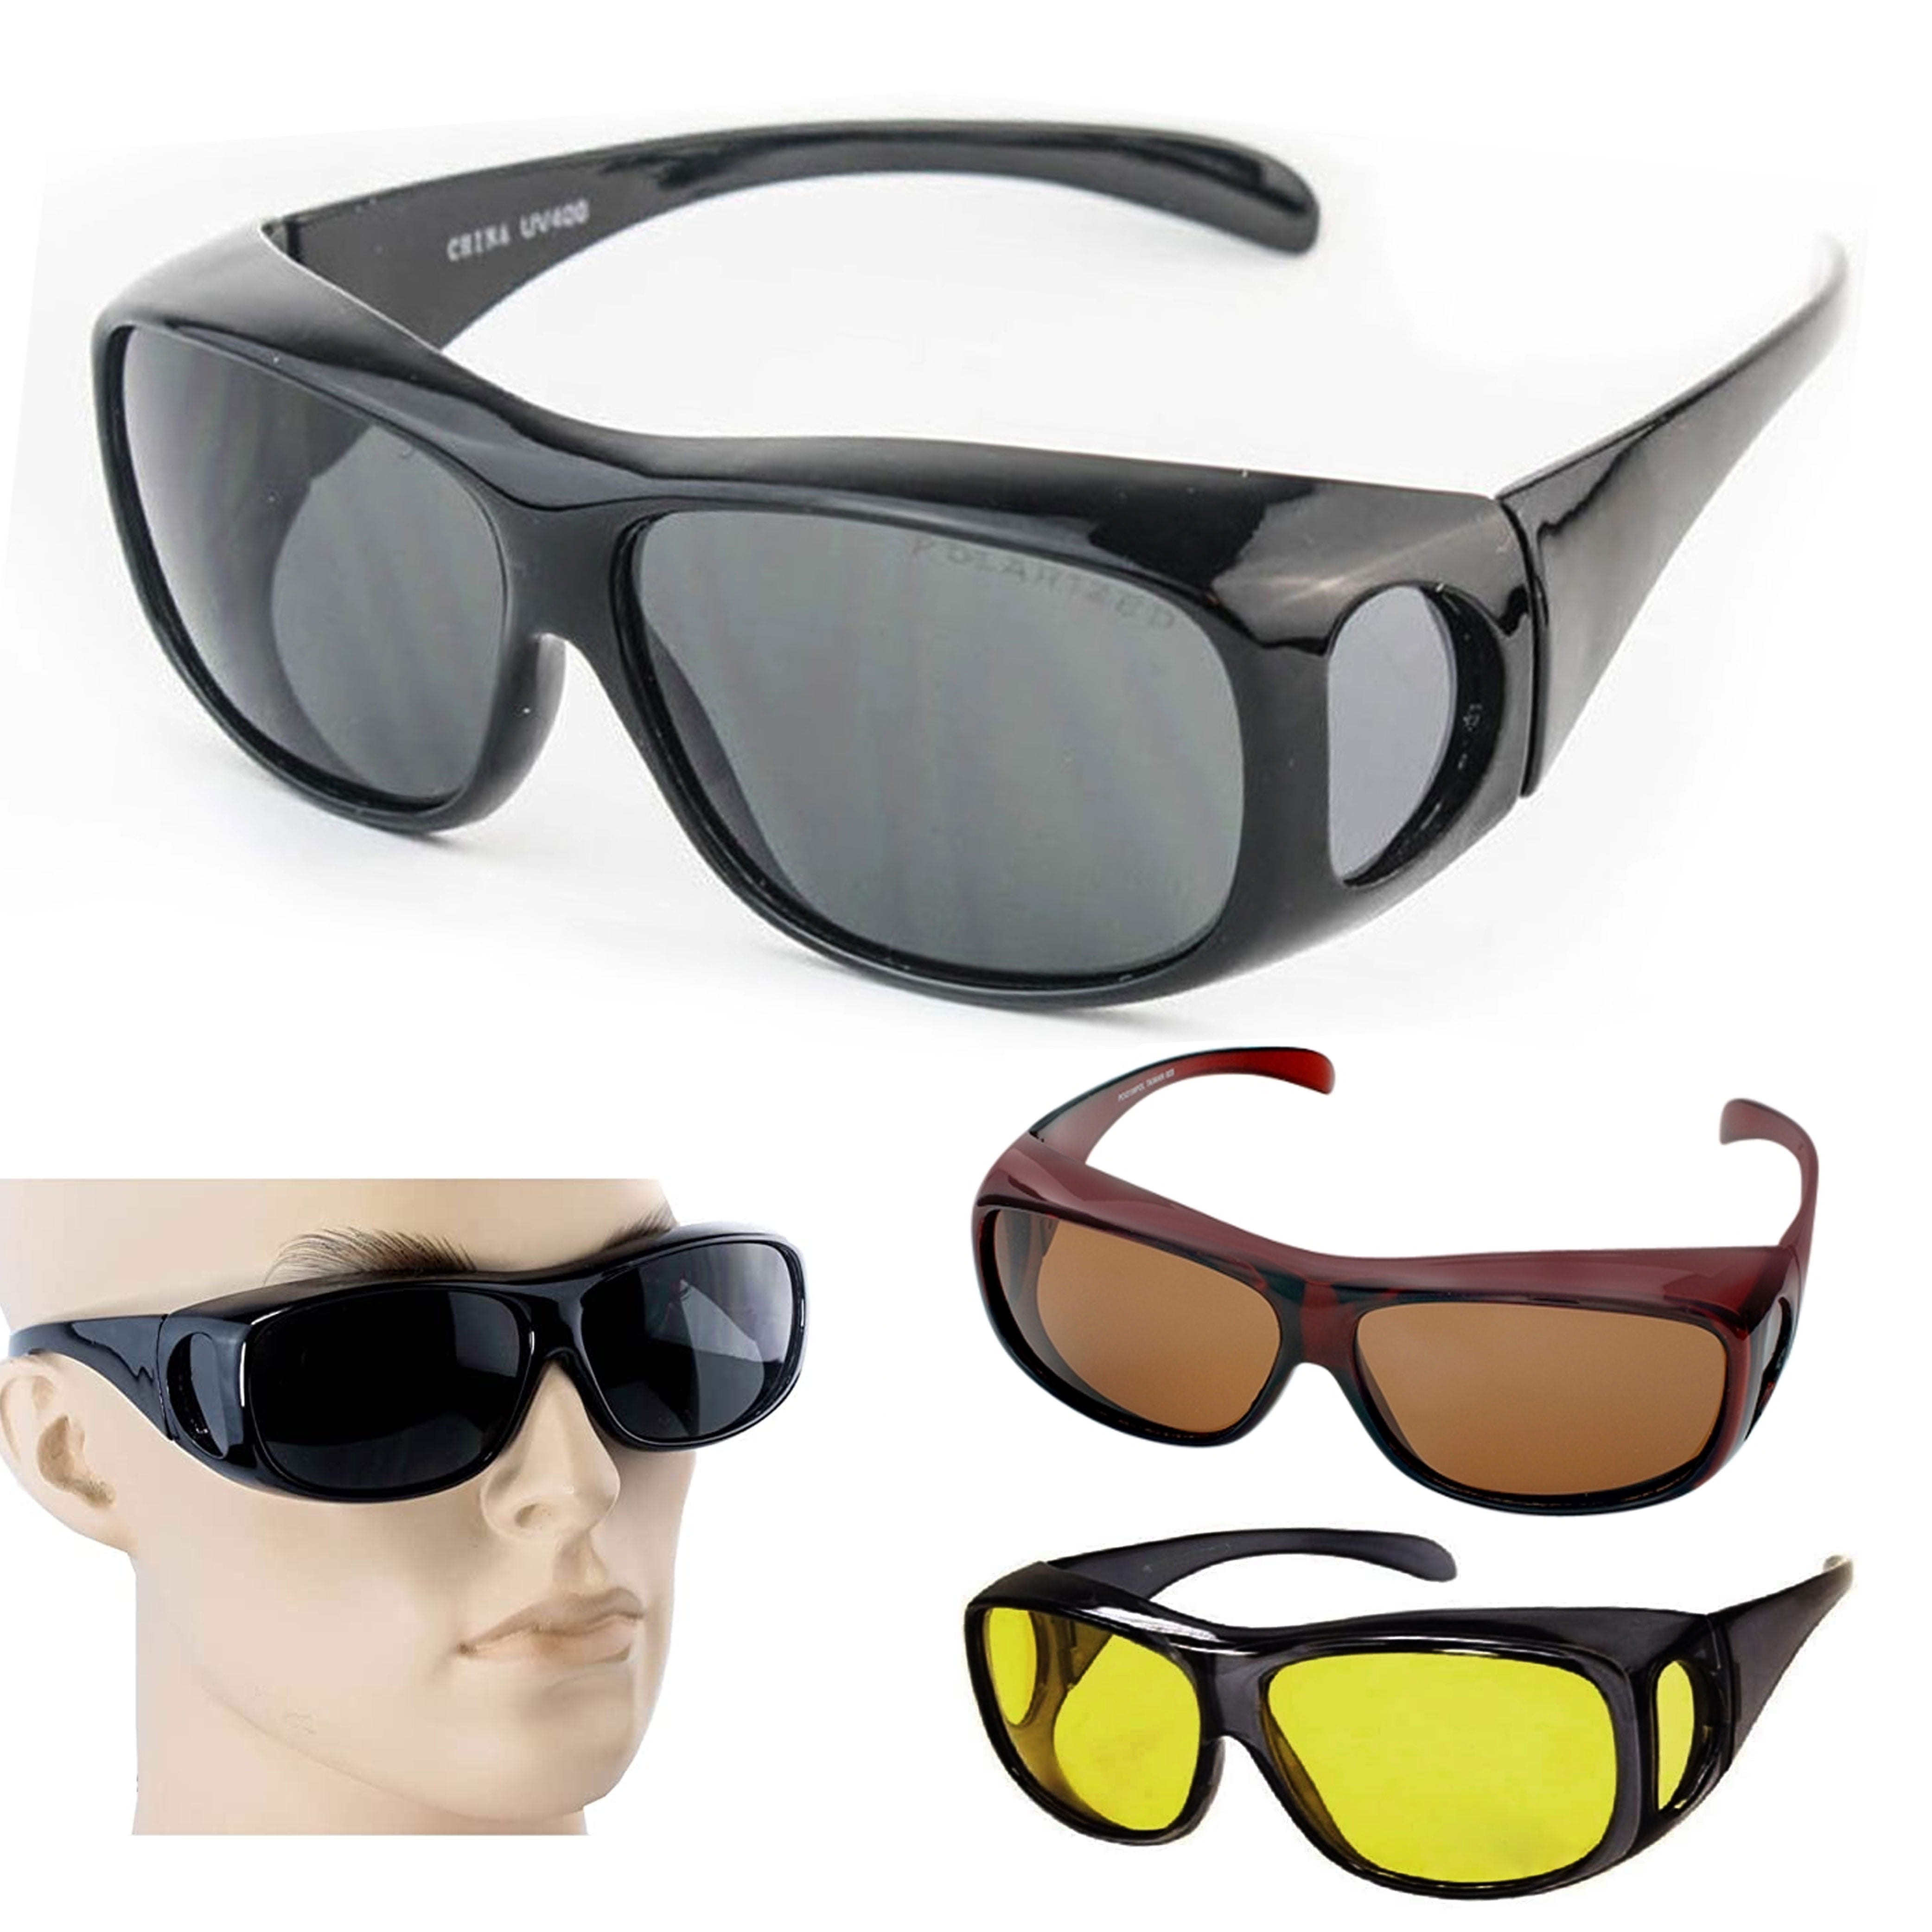 Sunglasses Over Glasses - Cocoons Eyewear Review